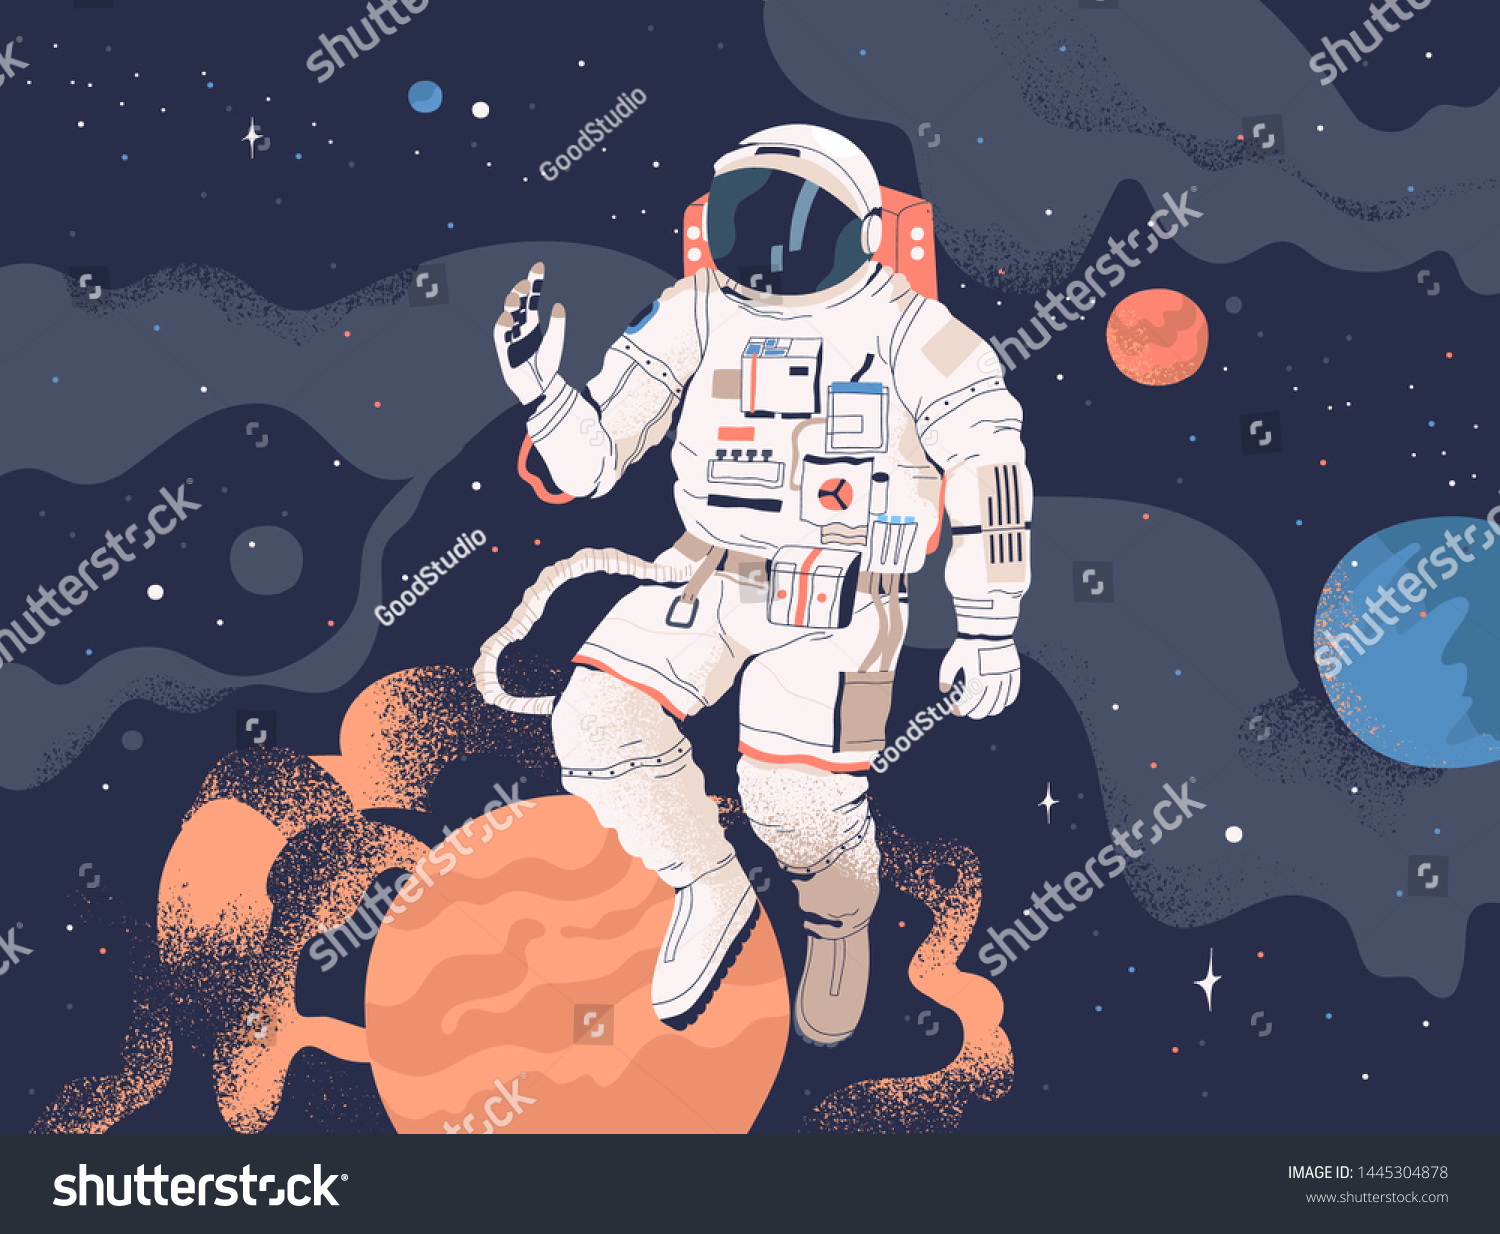 stock-vector-astronaut-exploring-outer-space-cosmonaut-in-spacesuit-performing-extravehicular-activity-or-1445304878